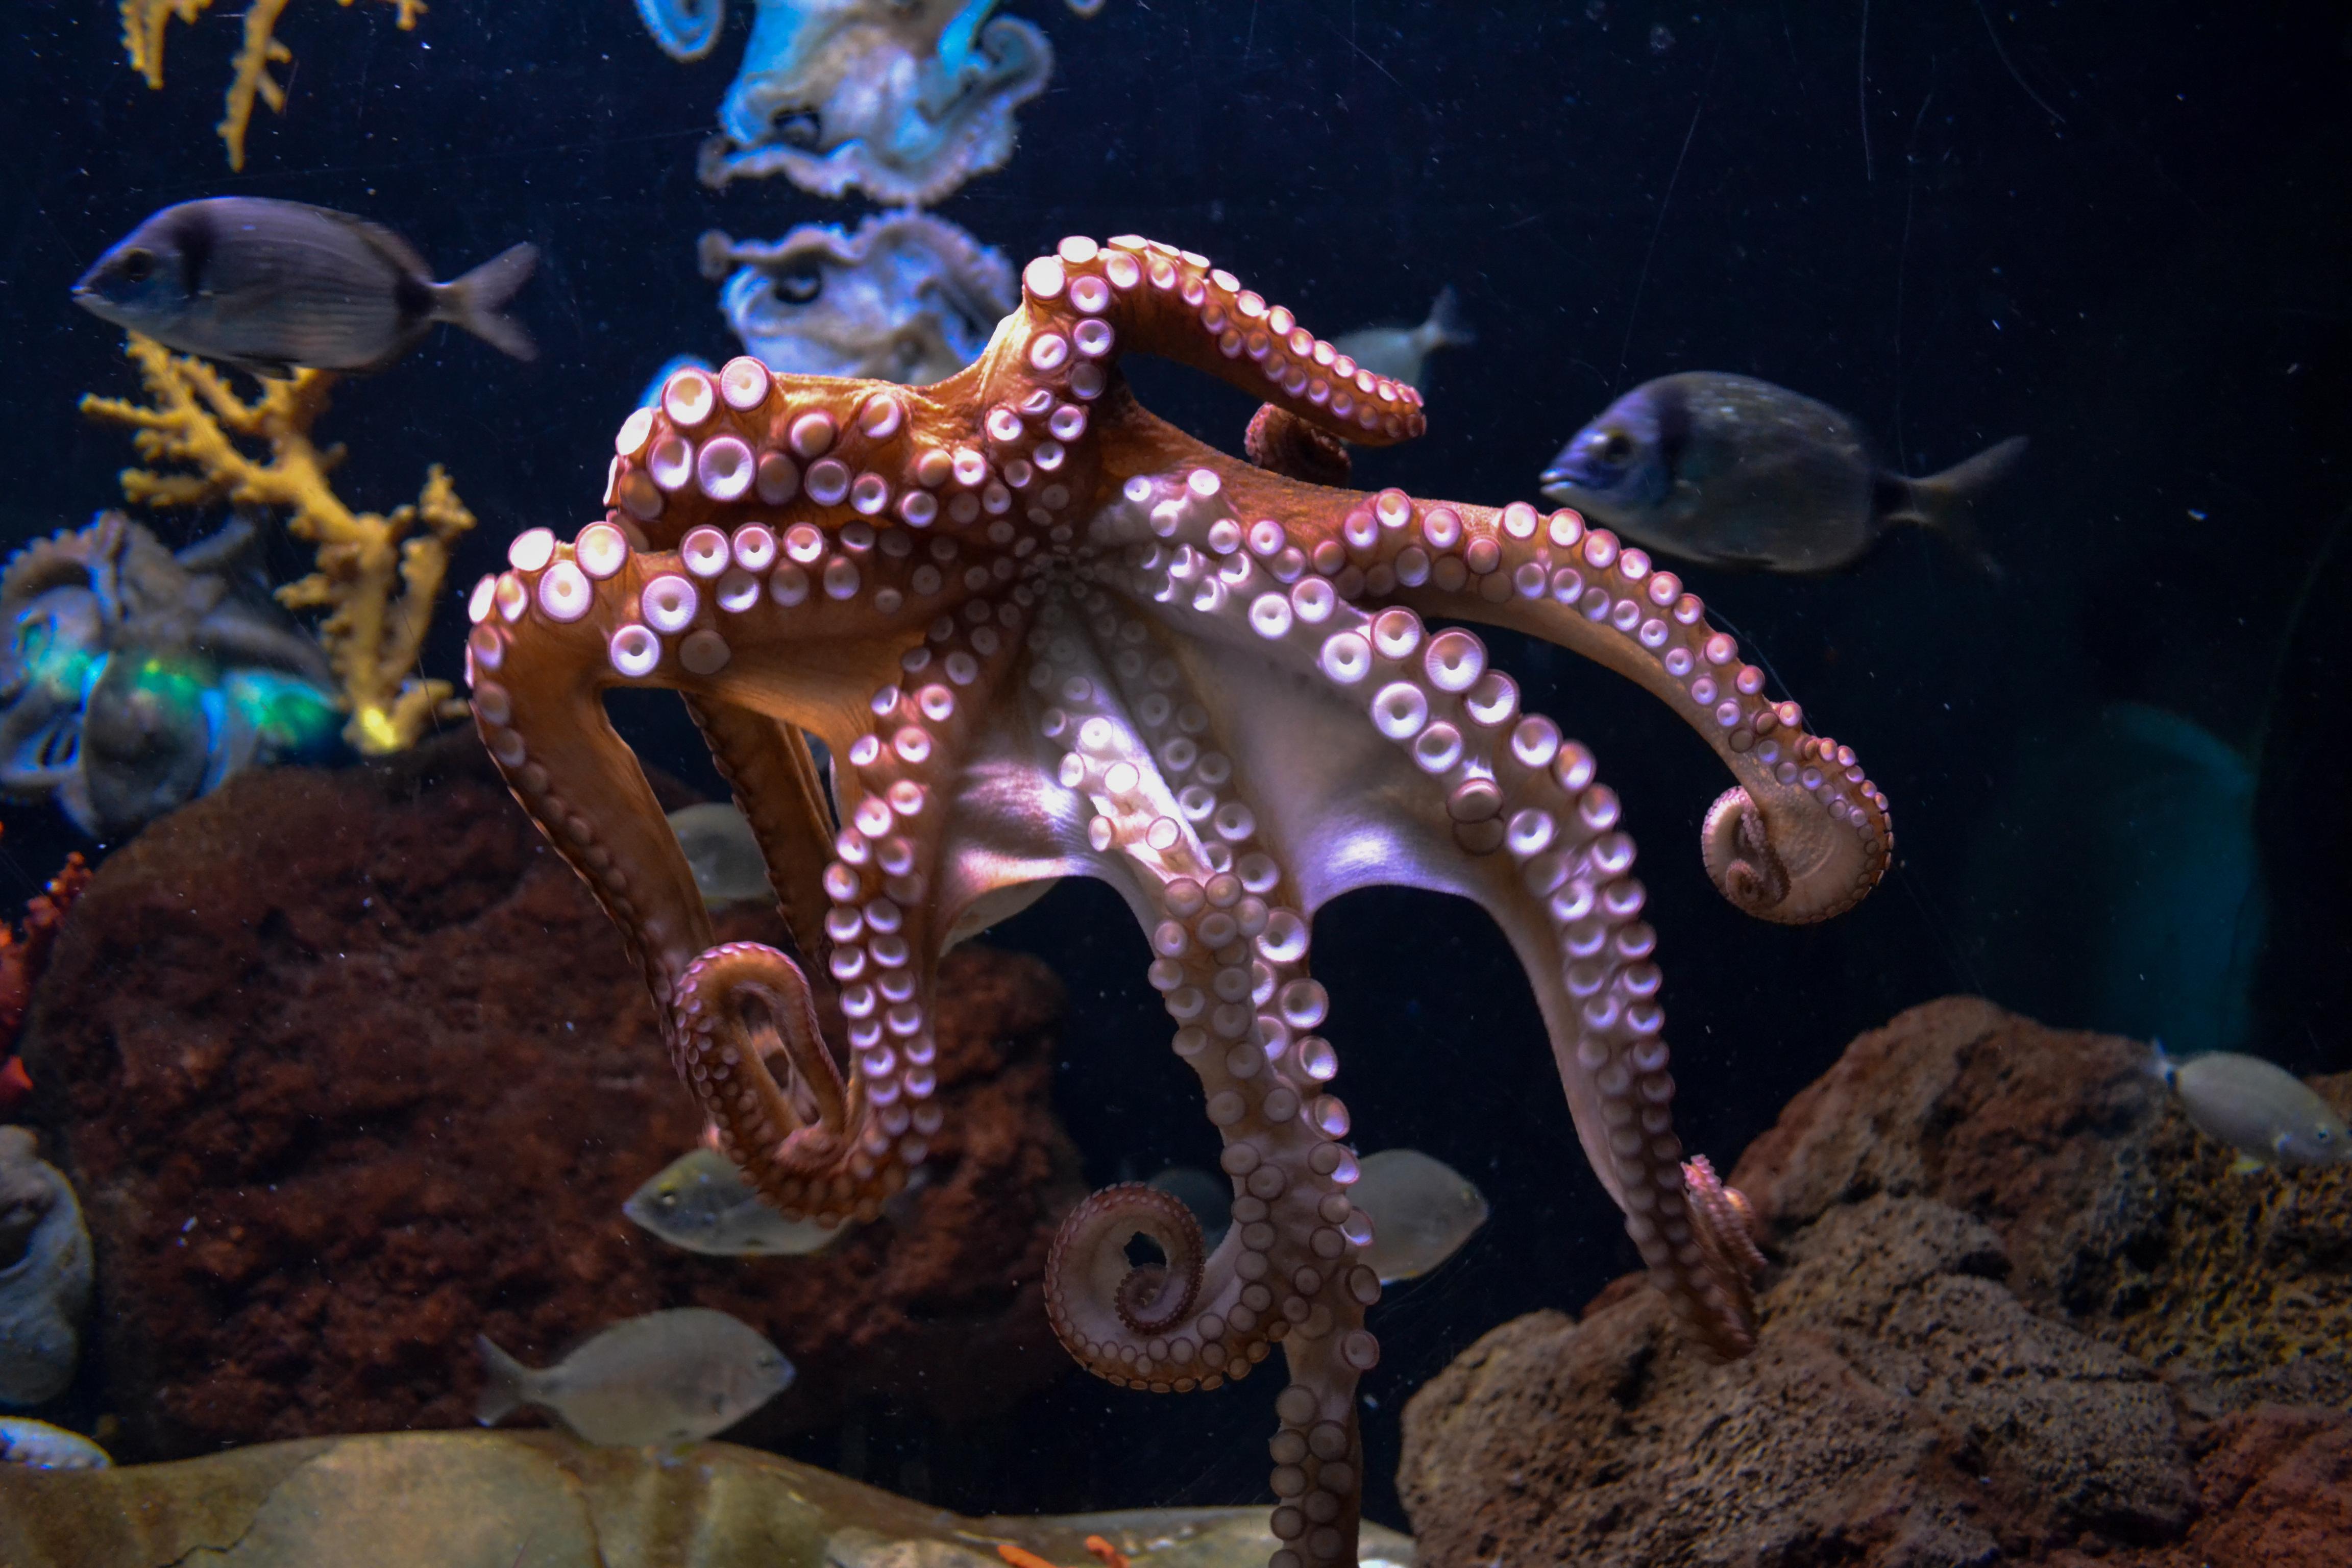 Octopus Picture [HD]. Download Free Image